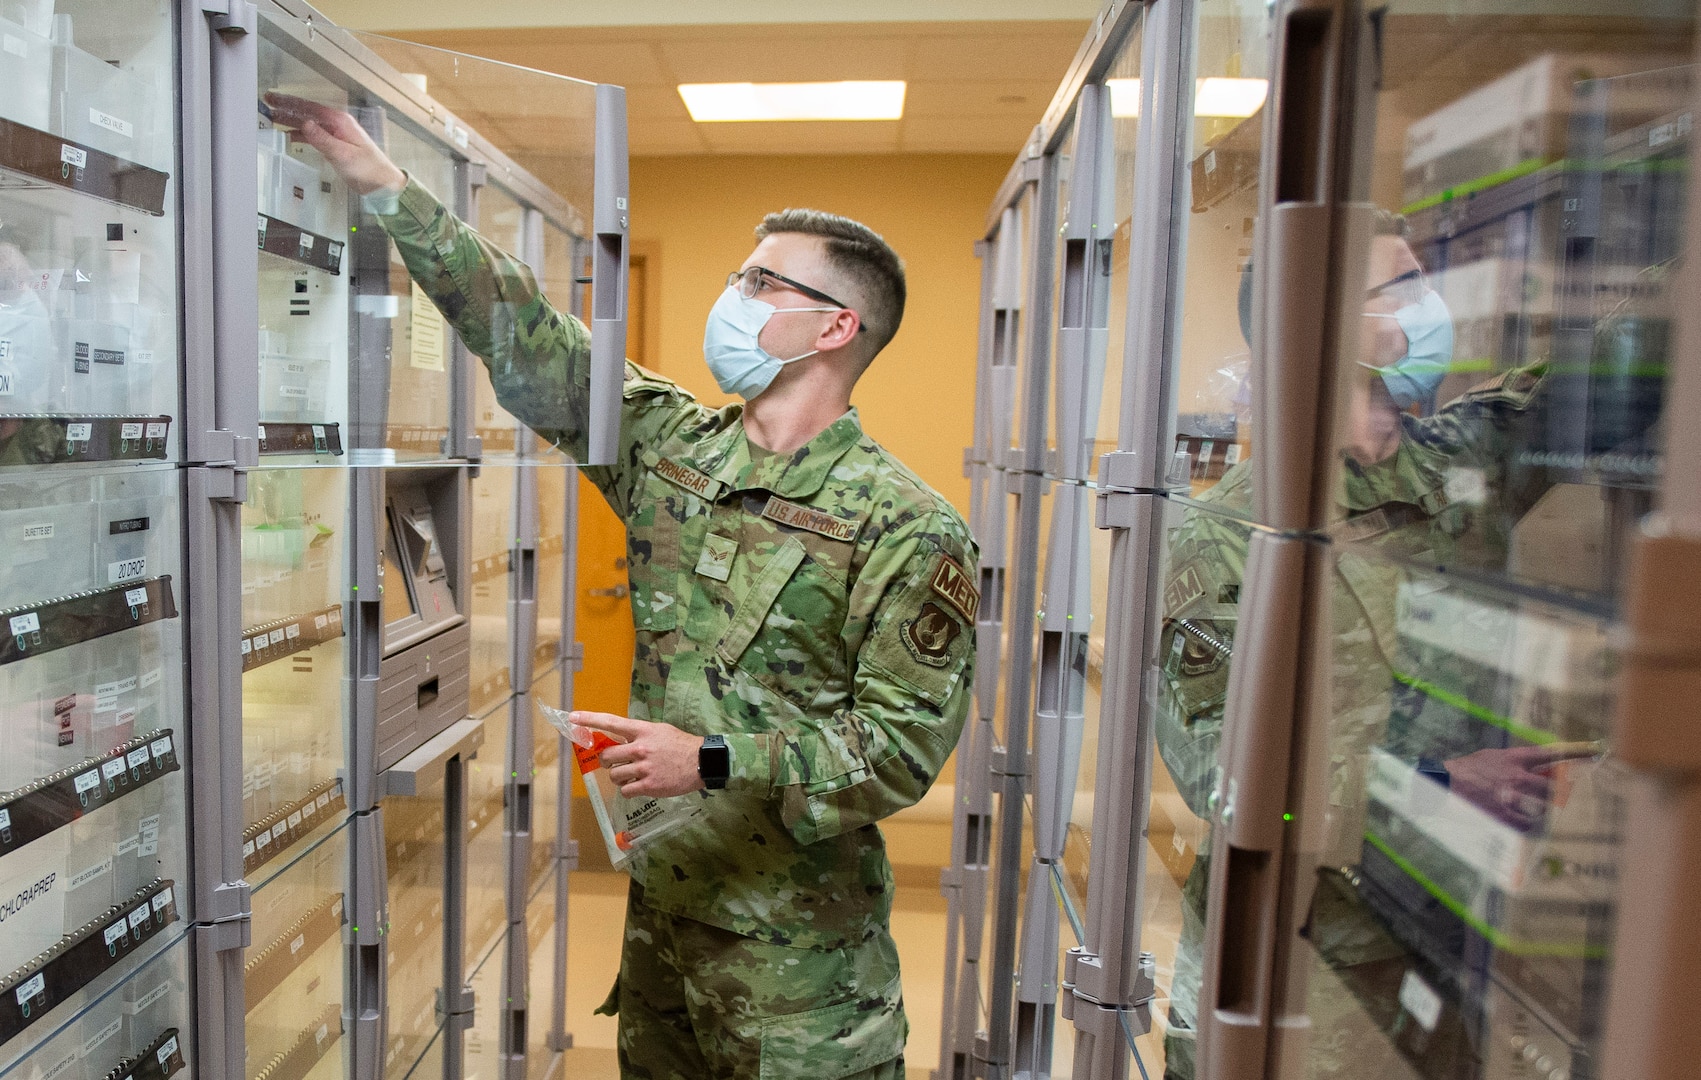 U.S. Air Force Senior Airman Joshua Bringer, a medical technician with the 88th Medical Group, retrieves supplies in the emergency room of the Wright-Patterson Air Force Base, Ohio Medical Center, April, 28, 2021. The medical center is open 24 hours a day with medical personnel standing by to treat anyone that comes through their door. (U.S. Air Force photo by Wesley Farnsworth)